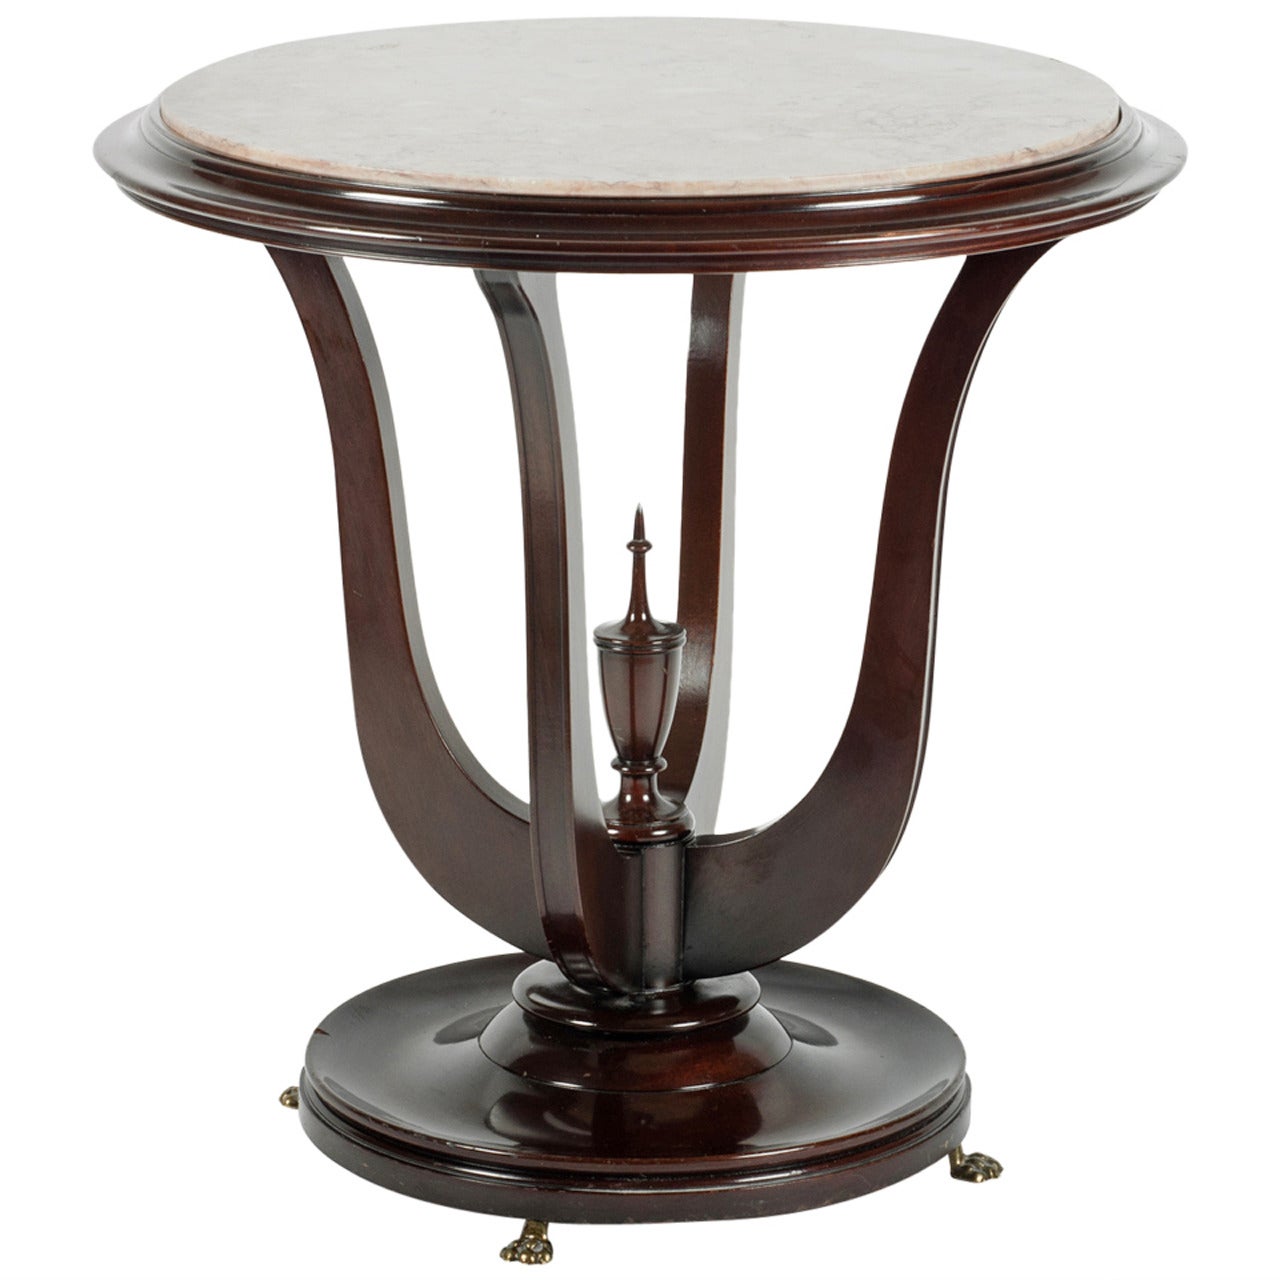 Marble-Top Table with Urn Finial in Base